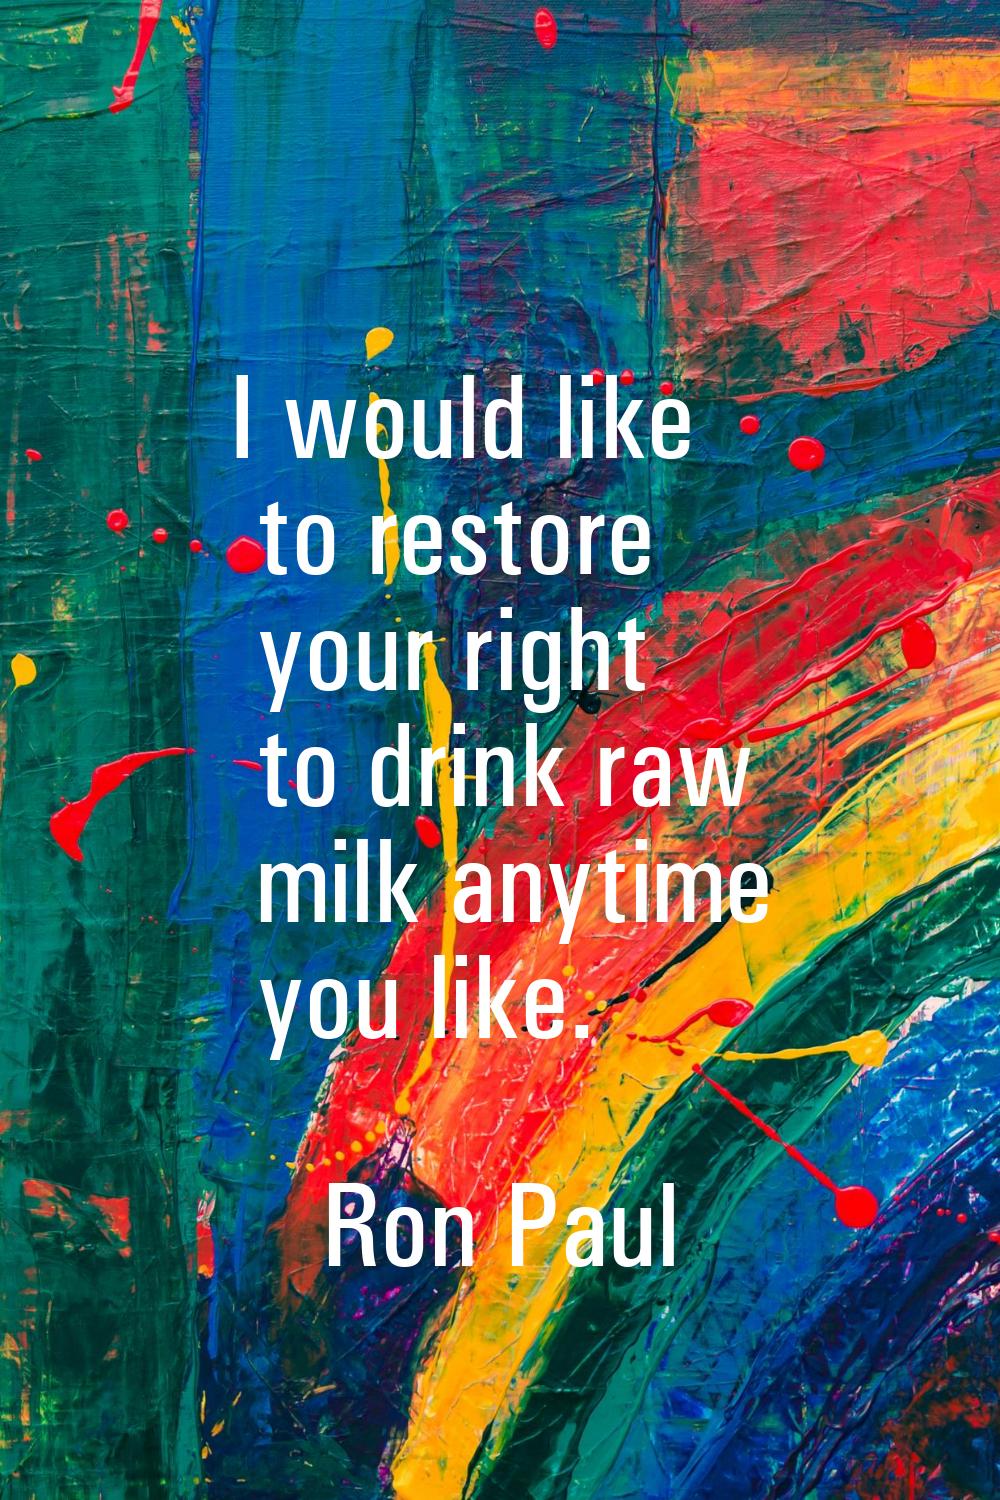 I would like to restore your right to drink raw milk anytime you like.